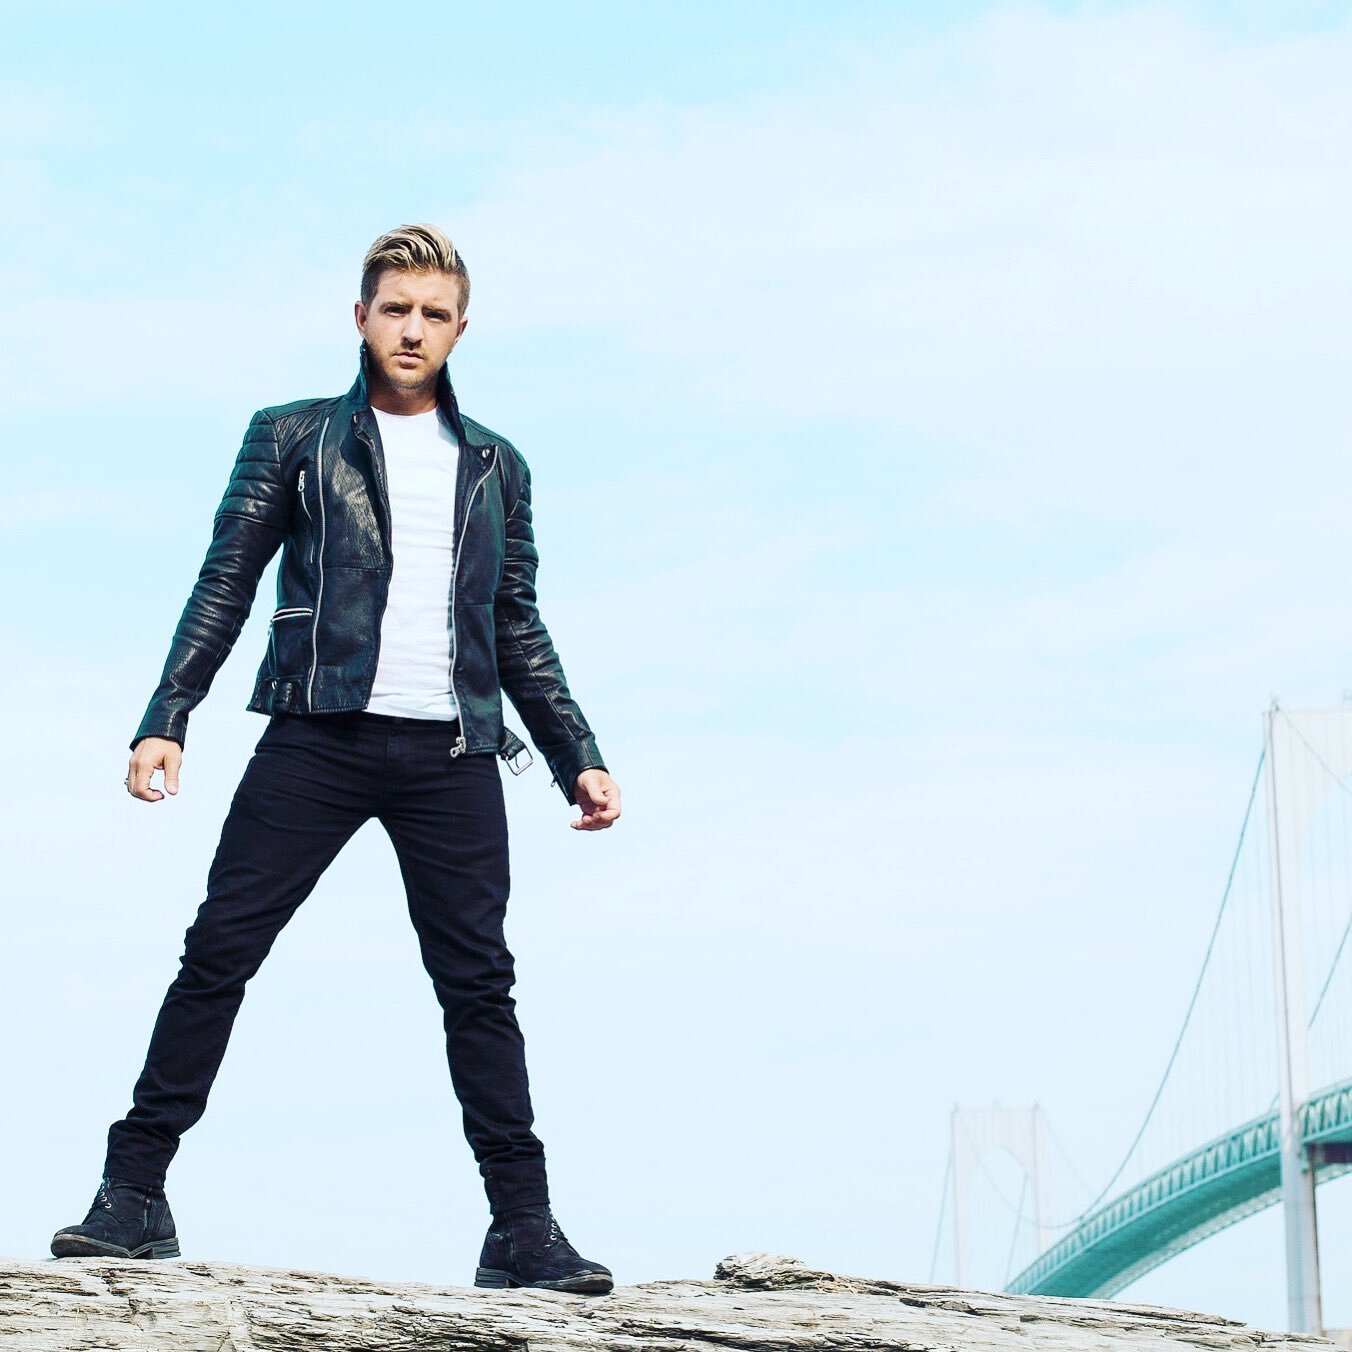 Country artist Billy Gilman — who was thrust into the spotlight as a child with this top-40 hit “One Voice” — will grace the stage next Friday, Aug. 6, for the Chehalis Music in the Park series.